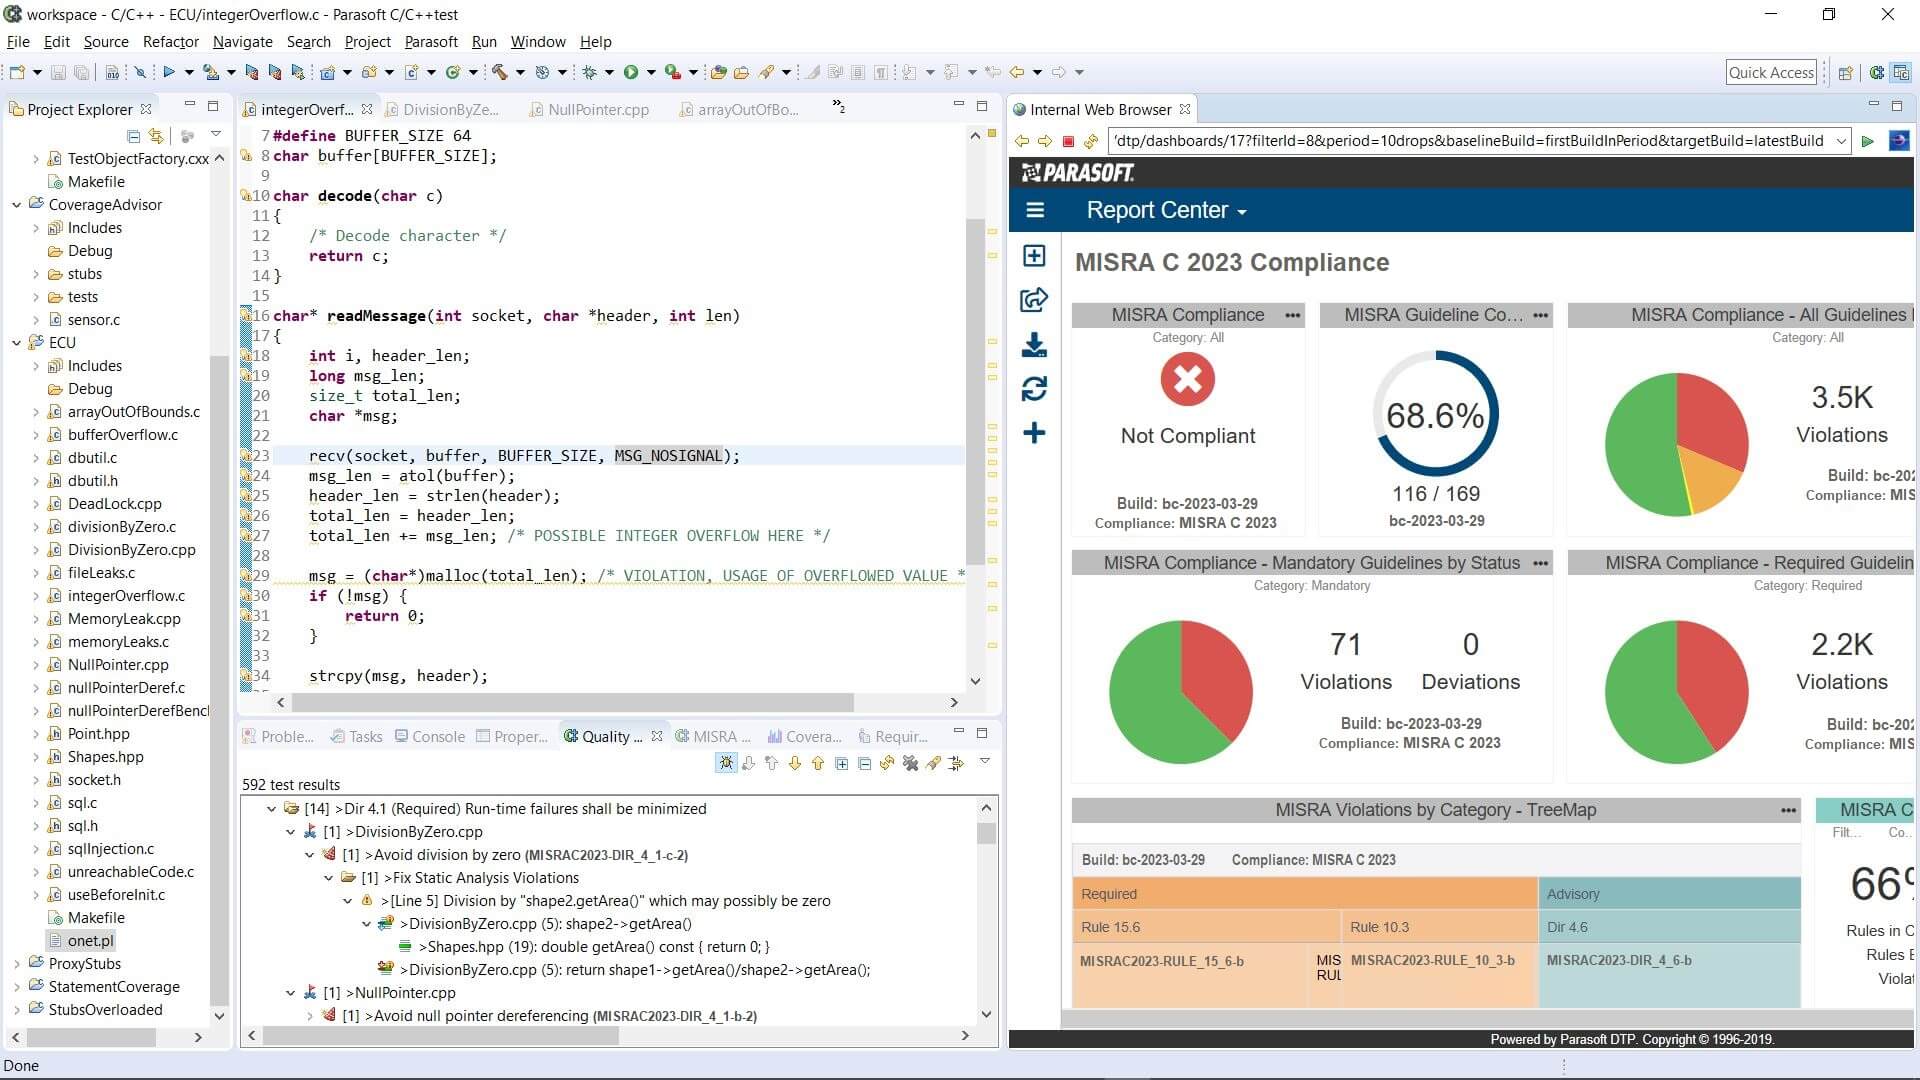 Screen capture of Parasoft C/C++test and DTP Report Center showing MISRA C 2012 Compliance